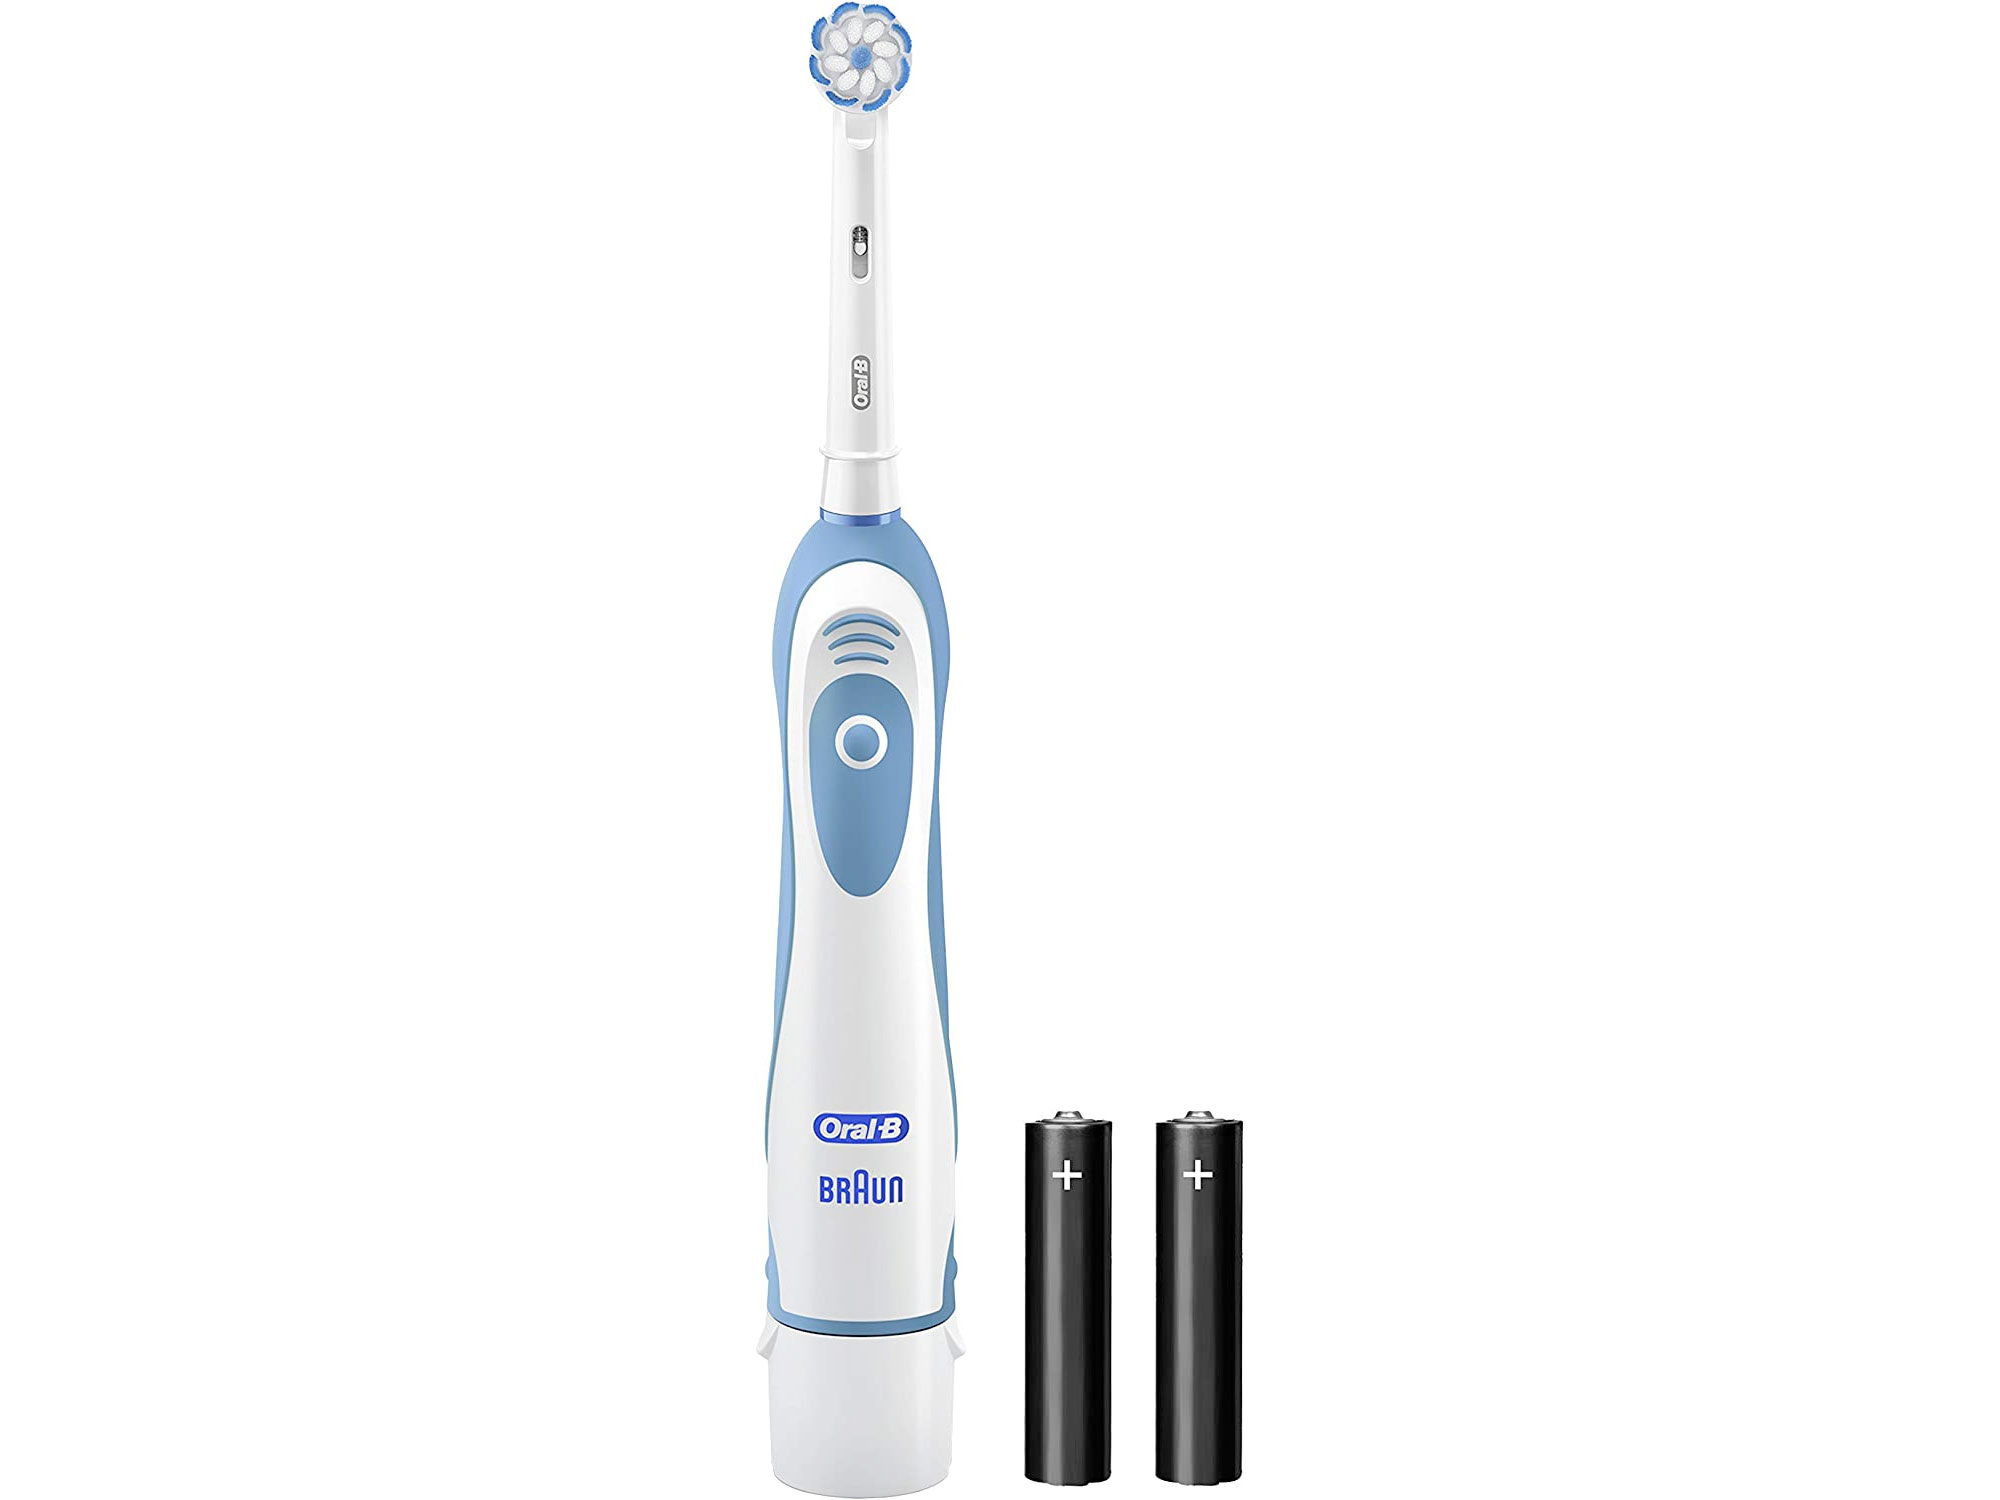 Amazon：Oral-B Power Pro-Health Gum Care Battery Powered Toothbrush只賣$7